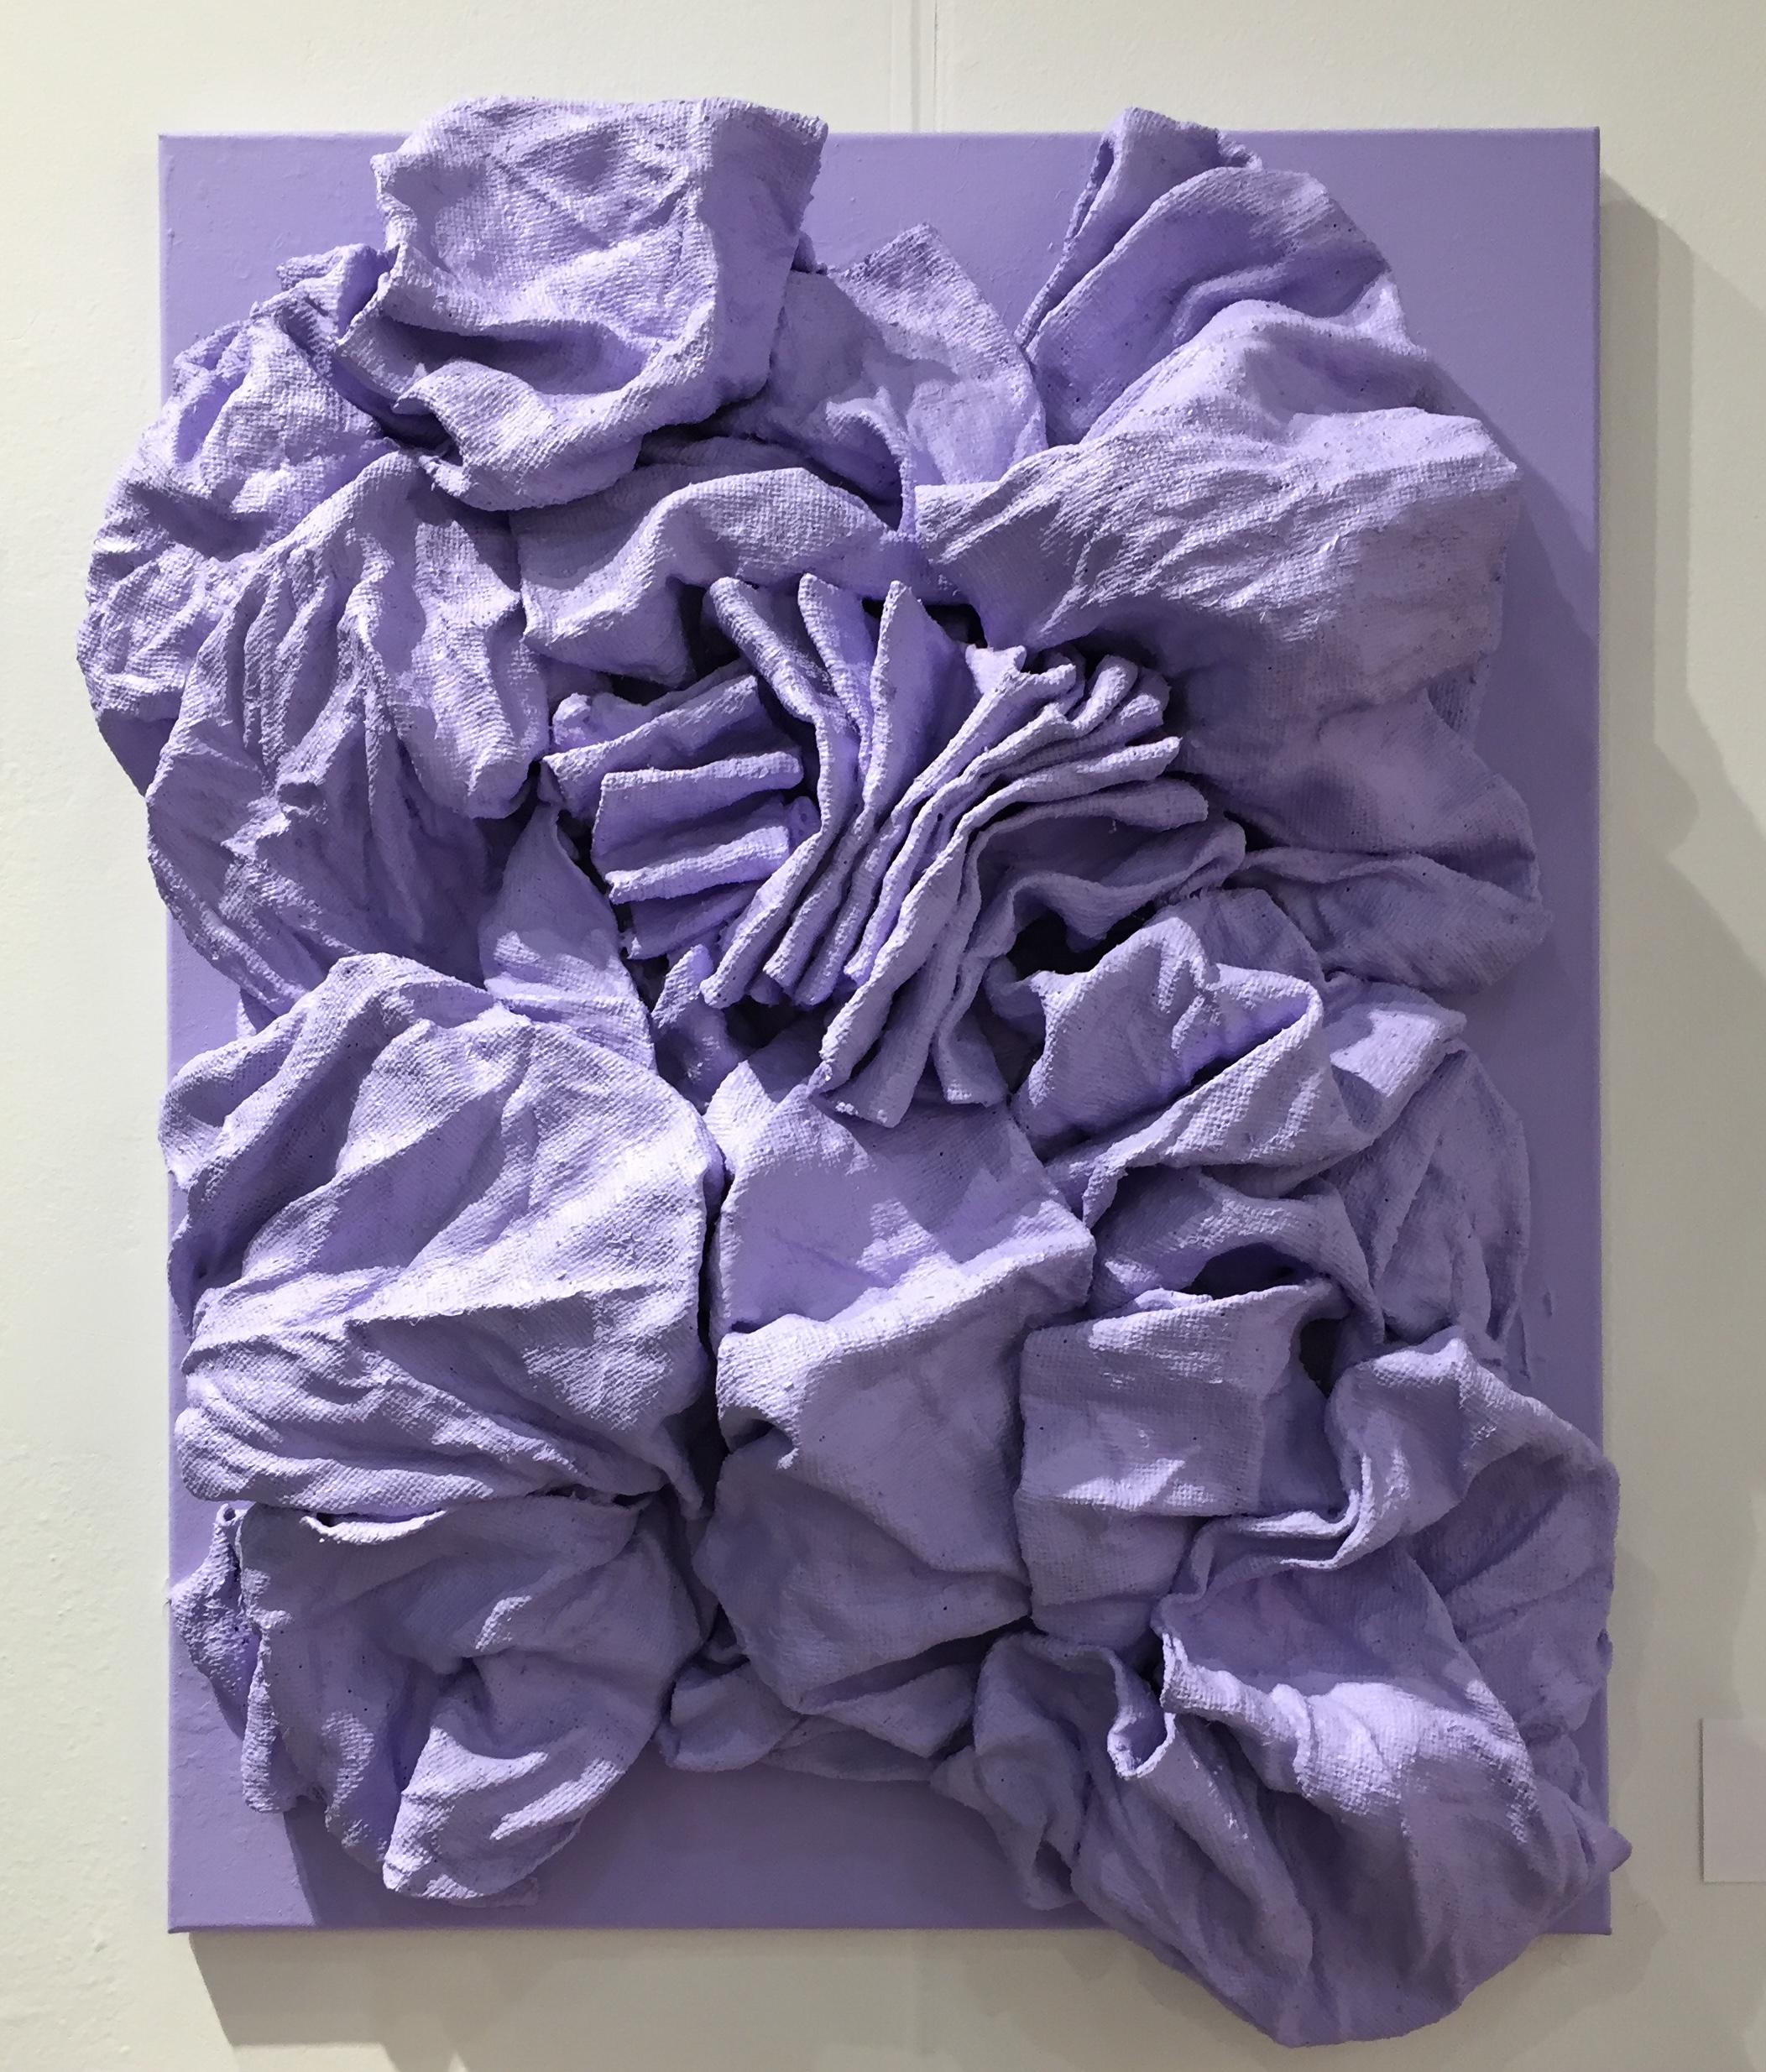 Lavender Folds (hardened fabric, lilac art, contemporary design, wall sculpture) - Mixed Media Art by Chloe Hedden